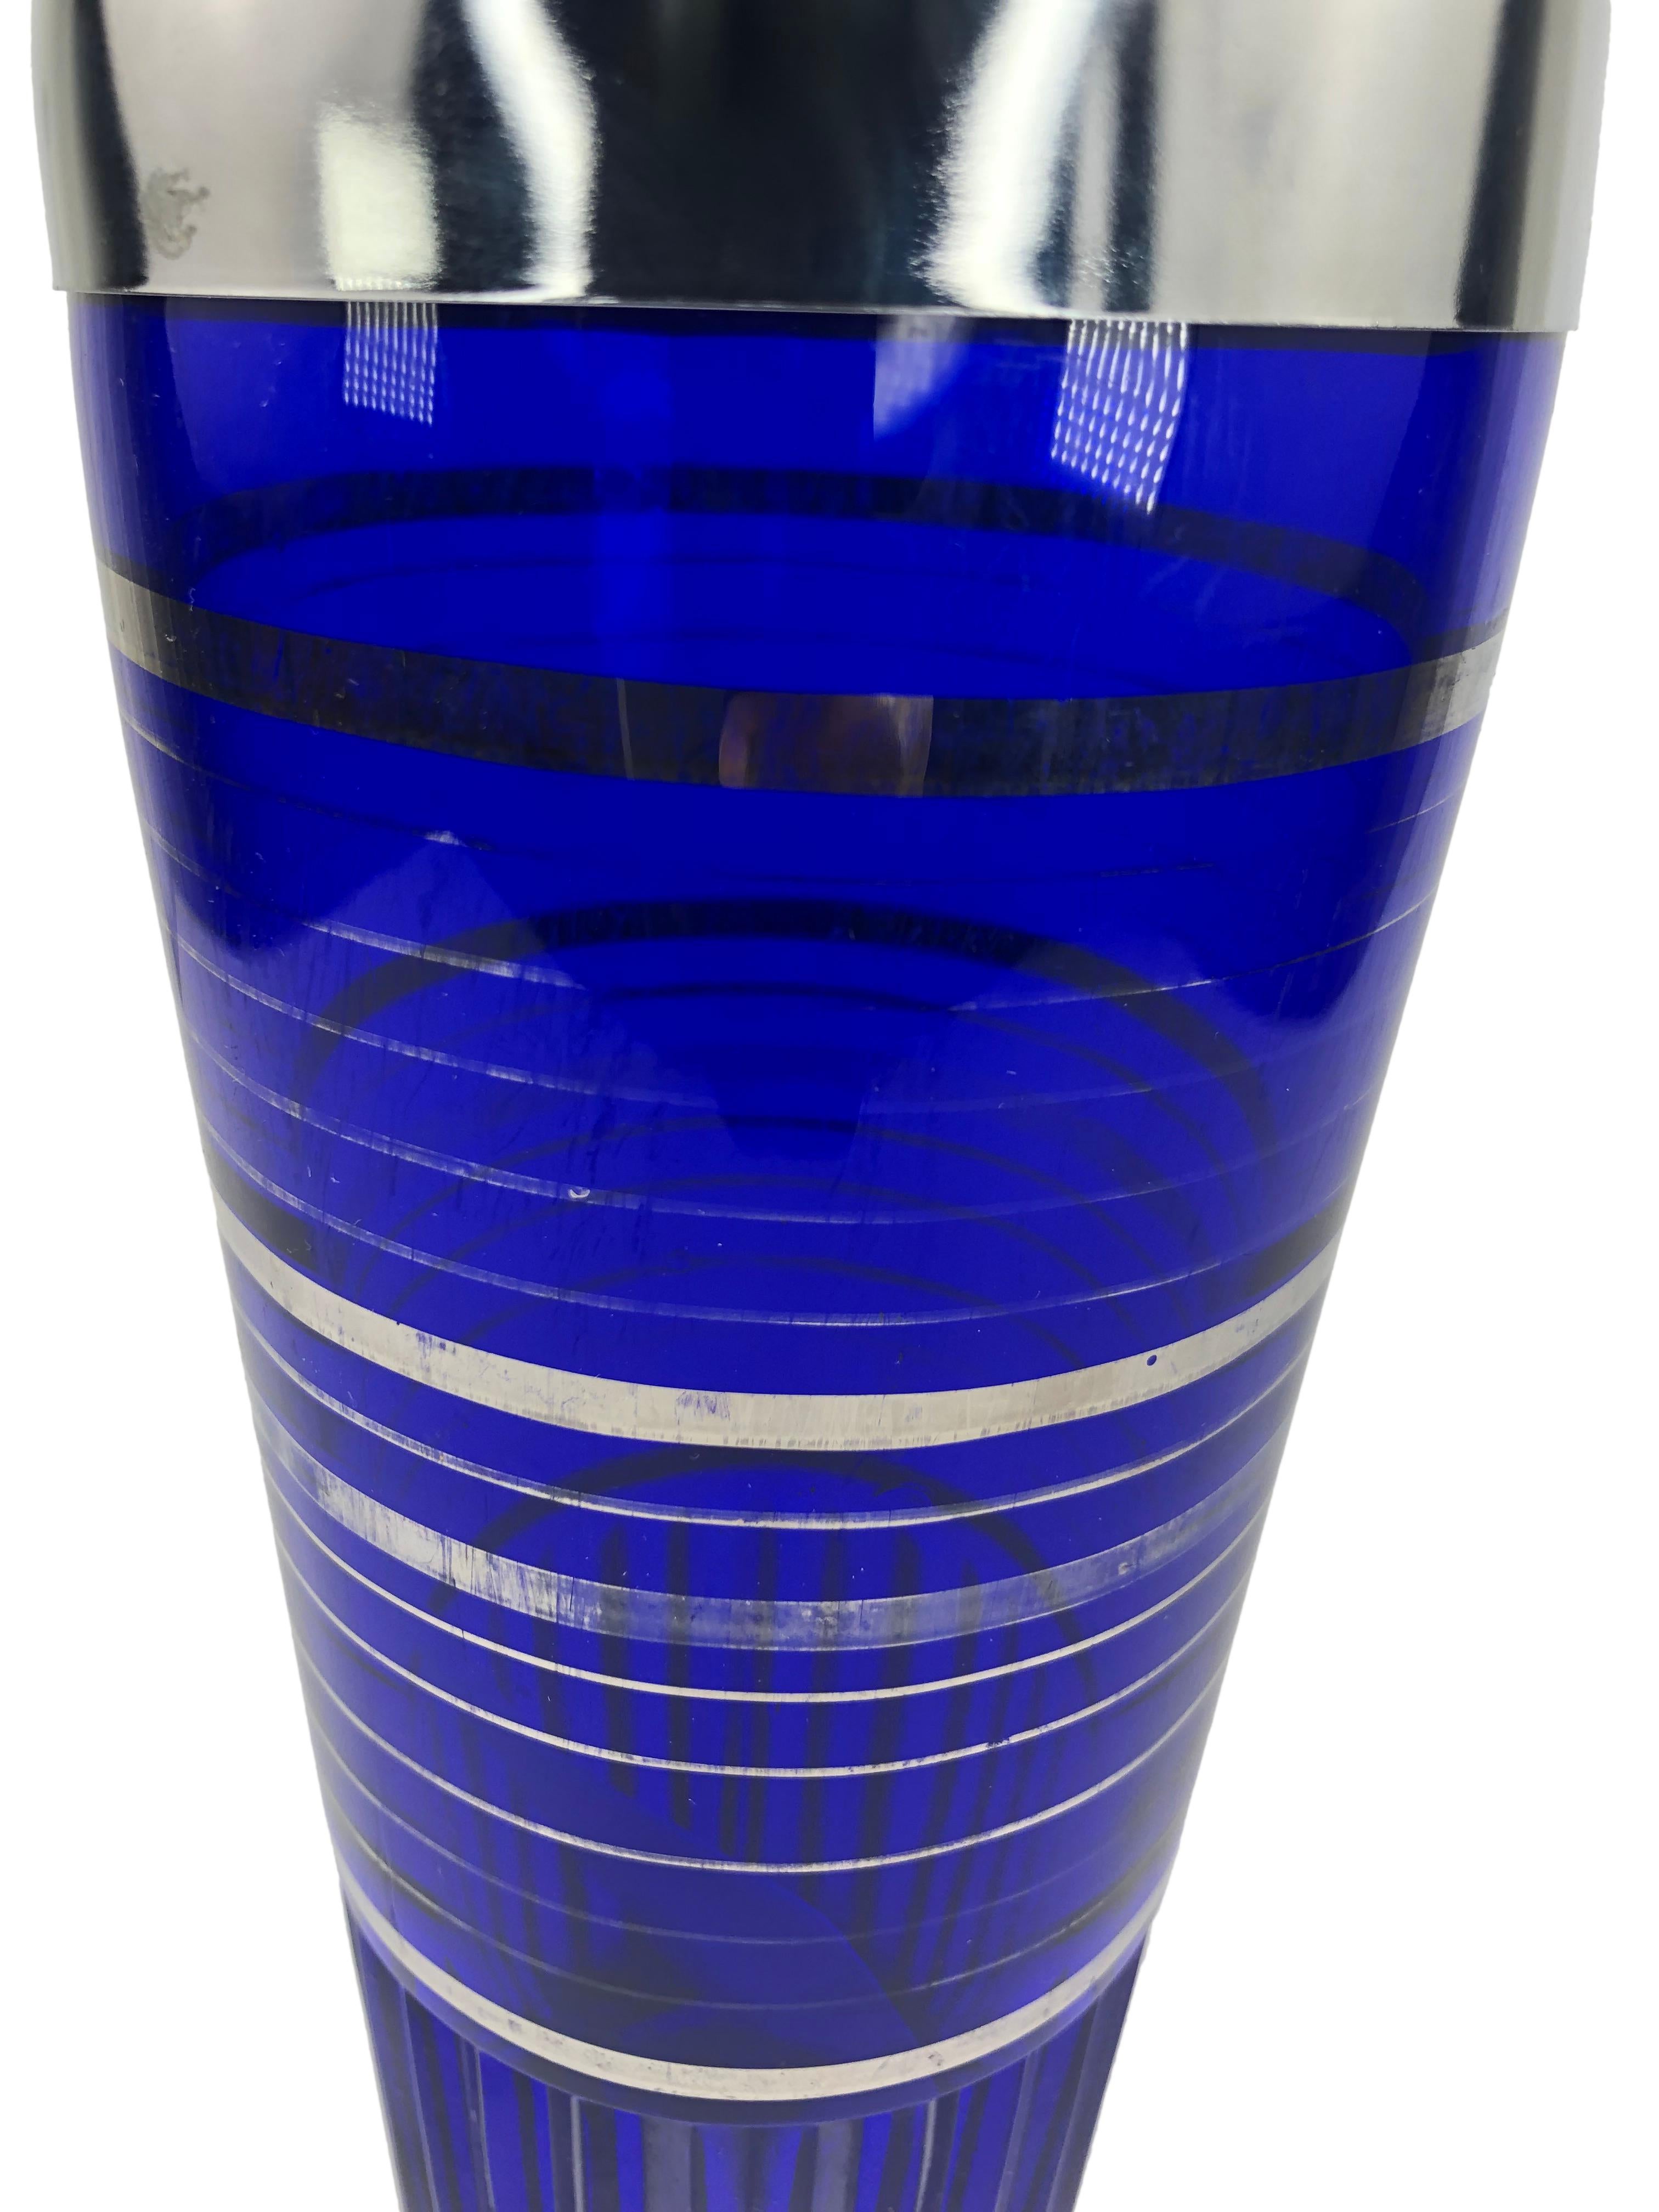 Mid-20th Century Art Deco Cobalt Blue Cocktail Shaker With Silver Overlay Bands and Fluted Base For Sale